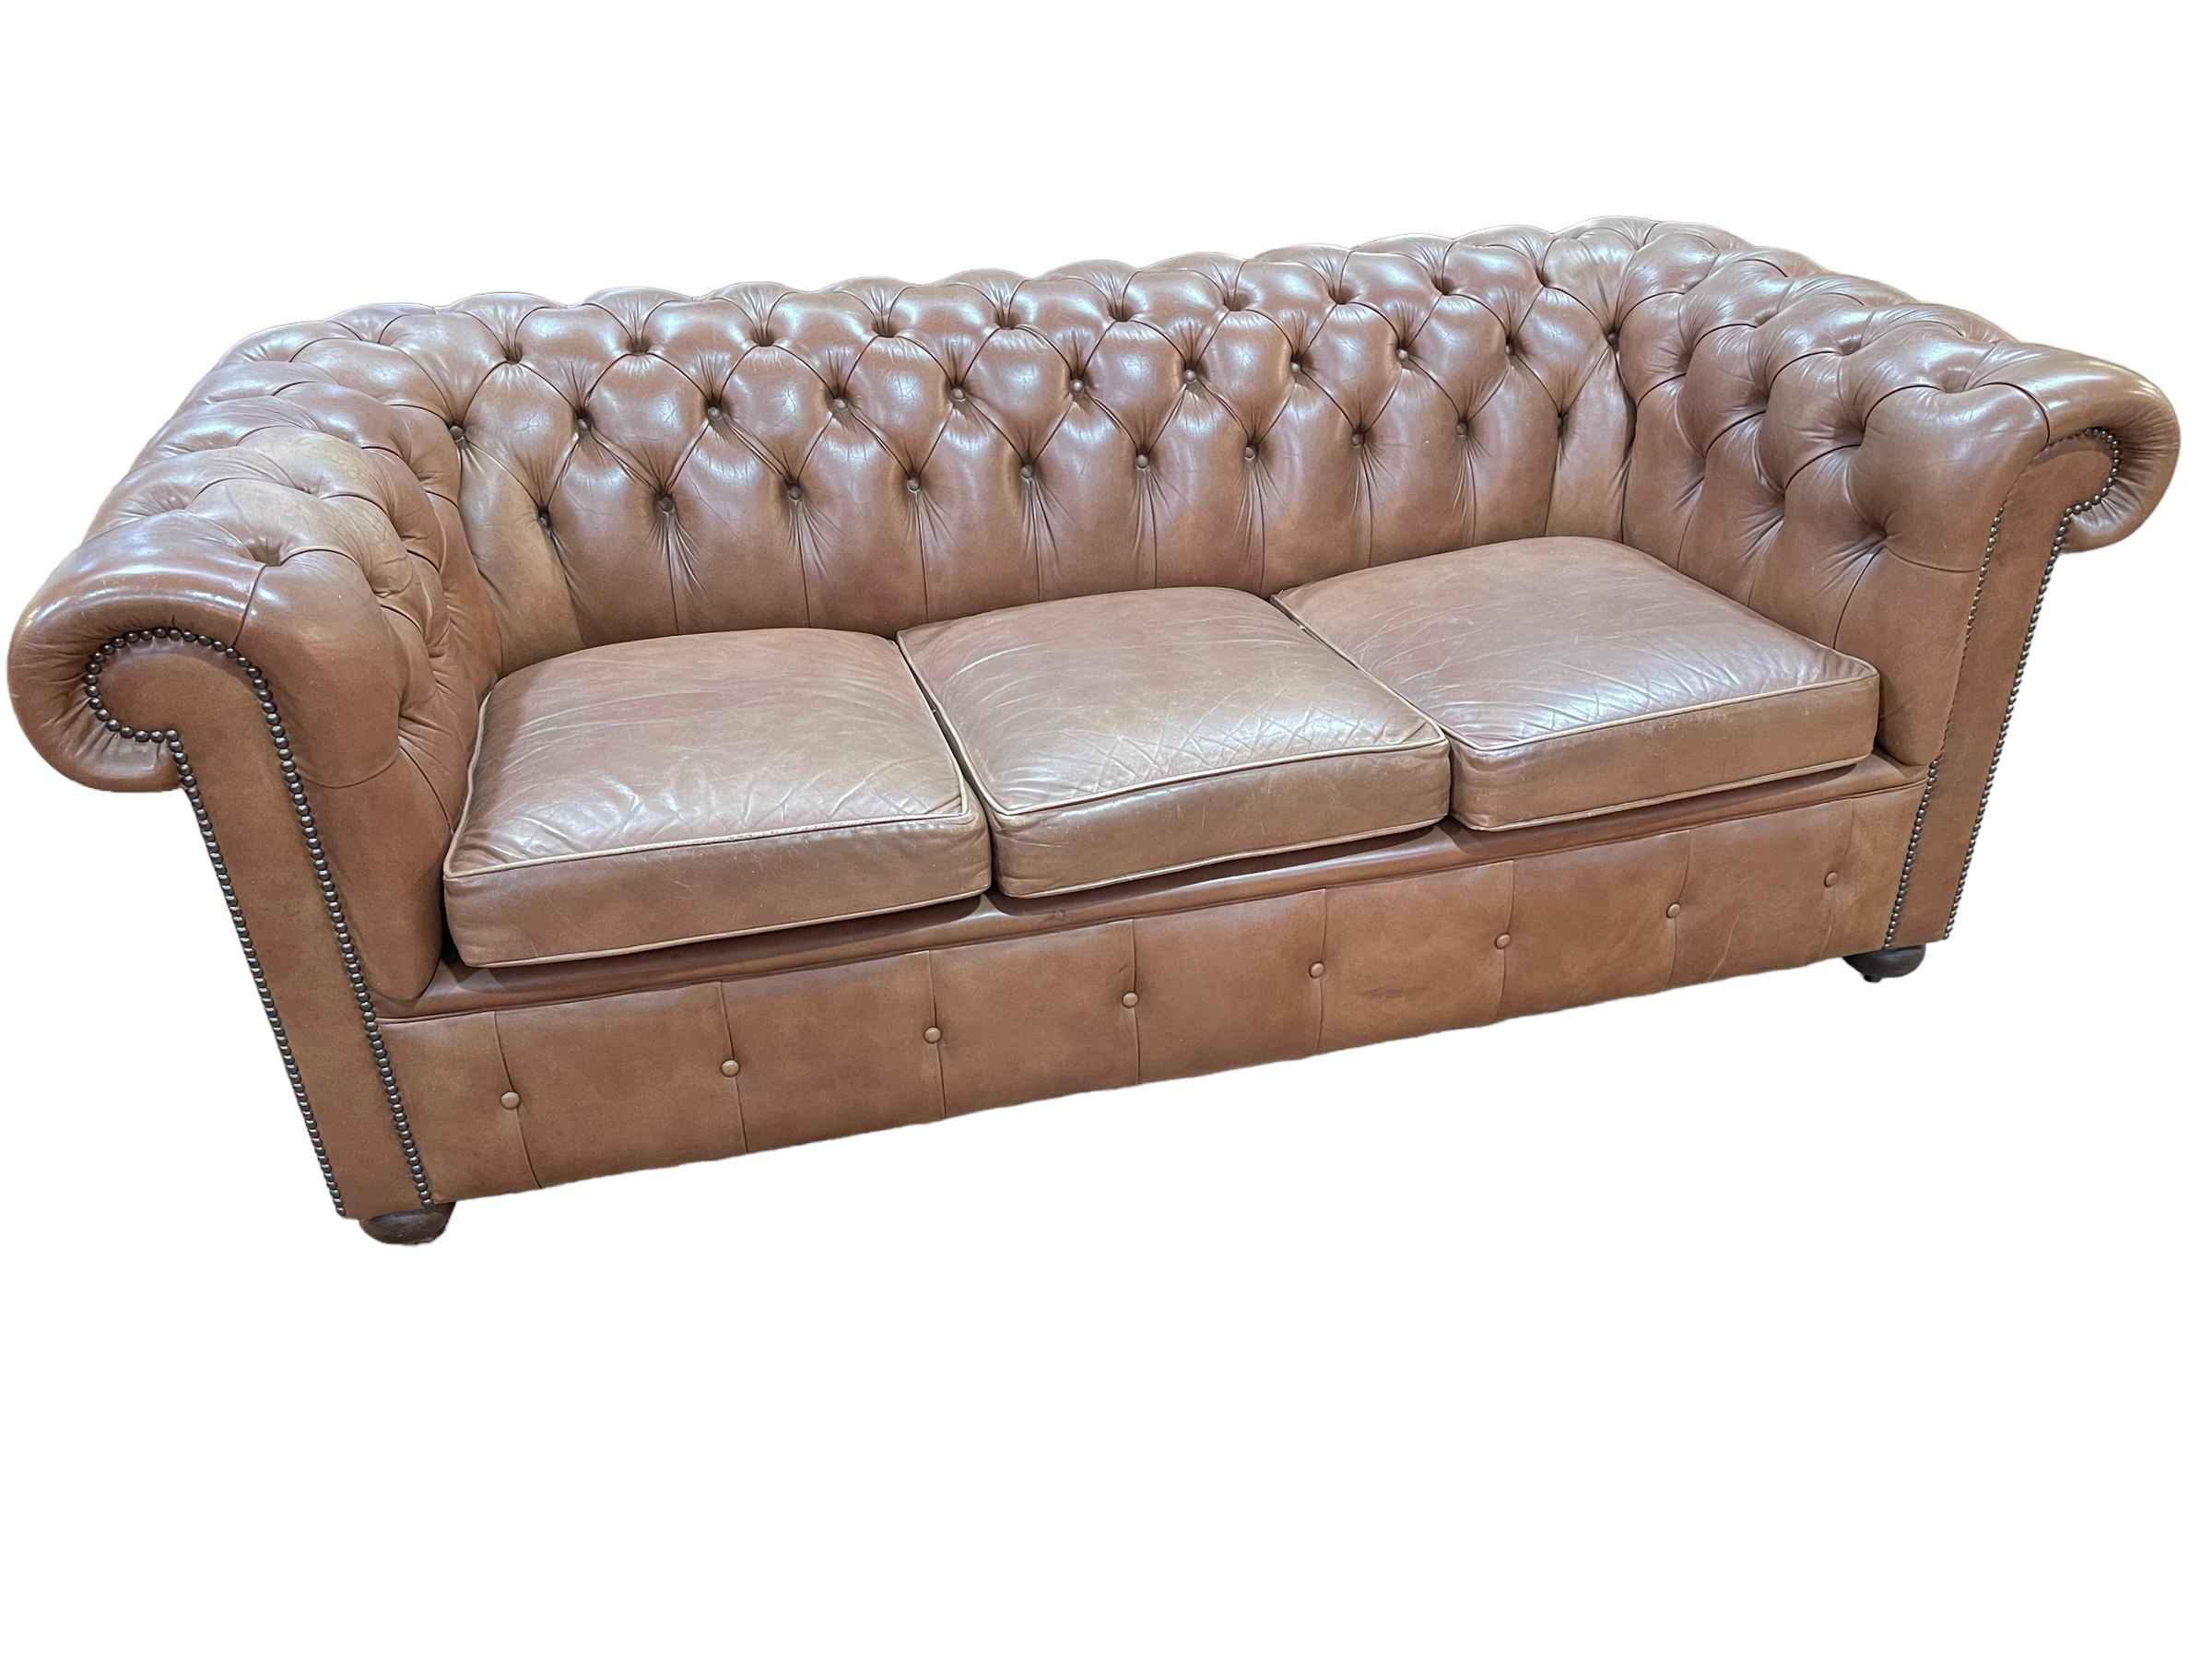 Millbrook tan deep buttoned leather three seater Chesterfield settee, 192cm by 71cm by 93cm.